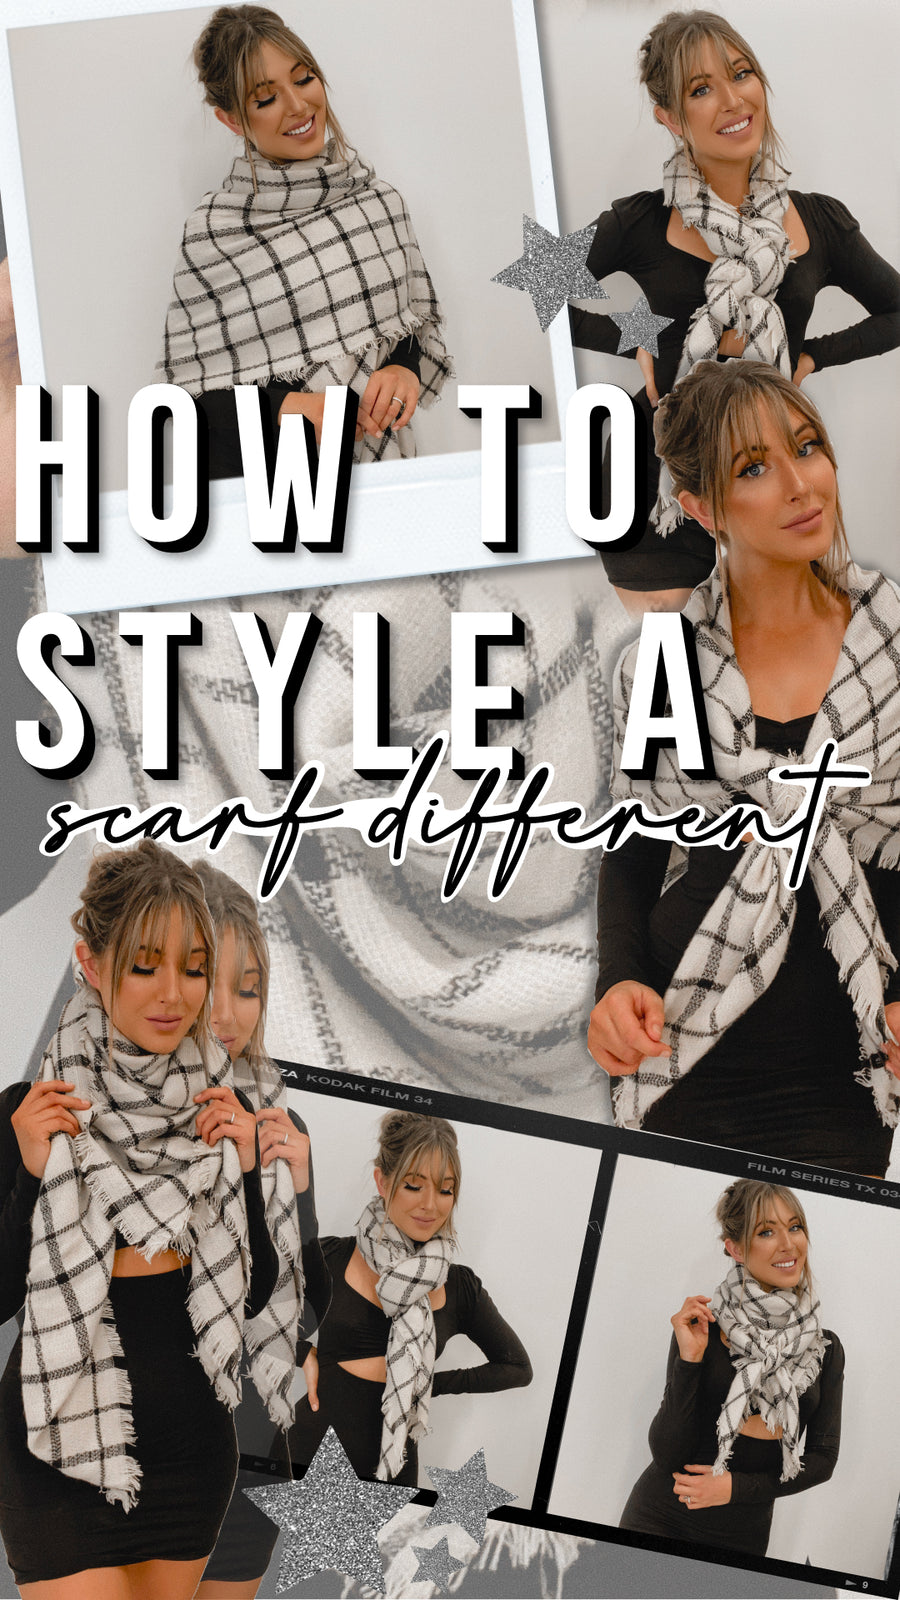 How to Style a Scarf different ways